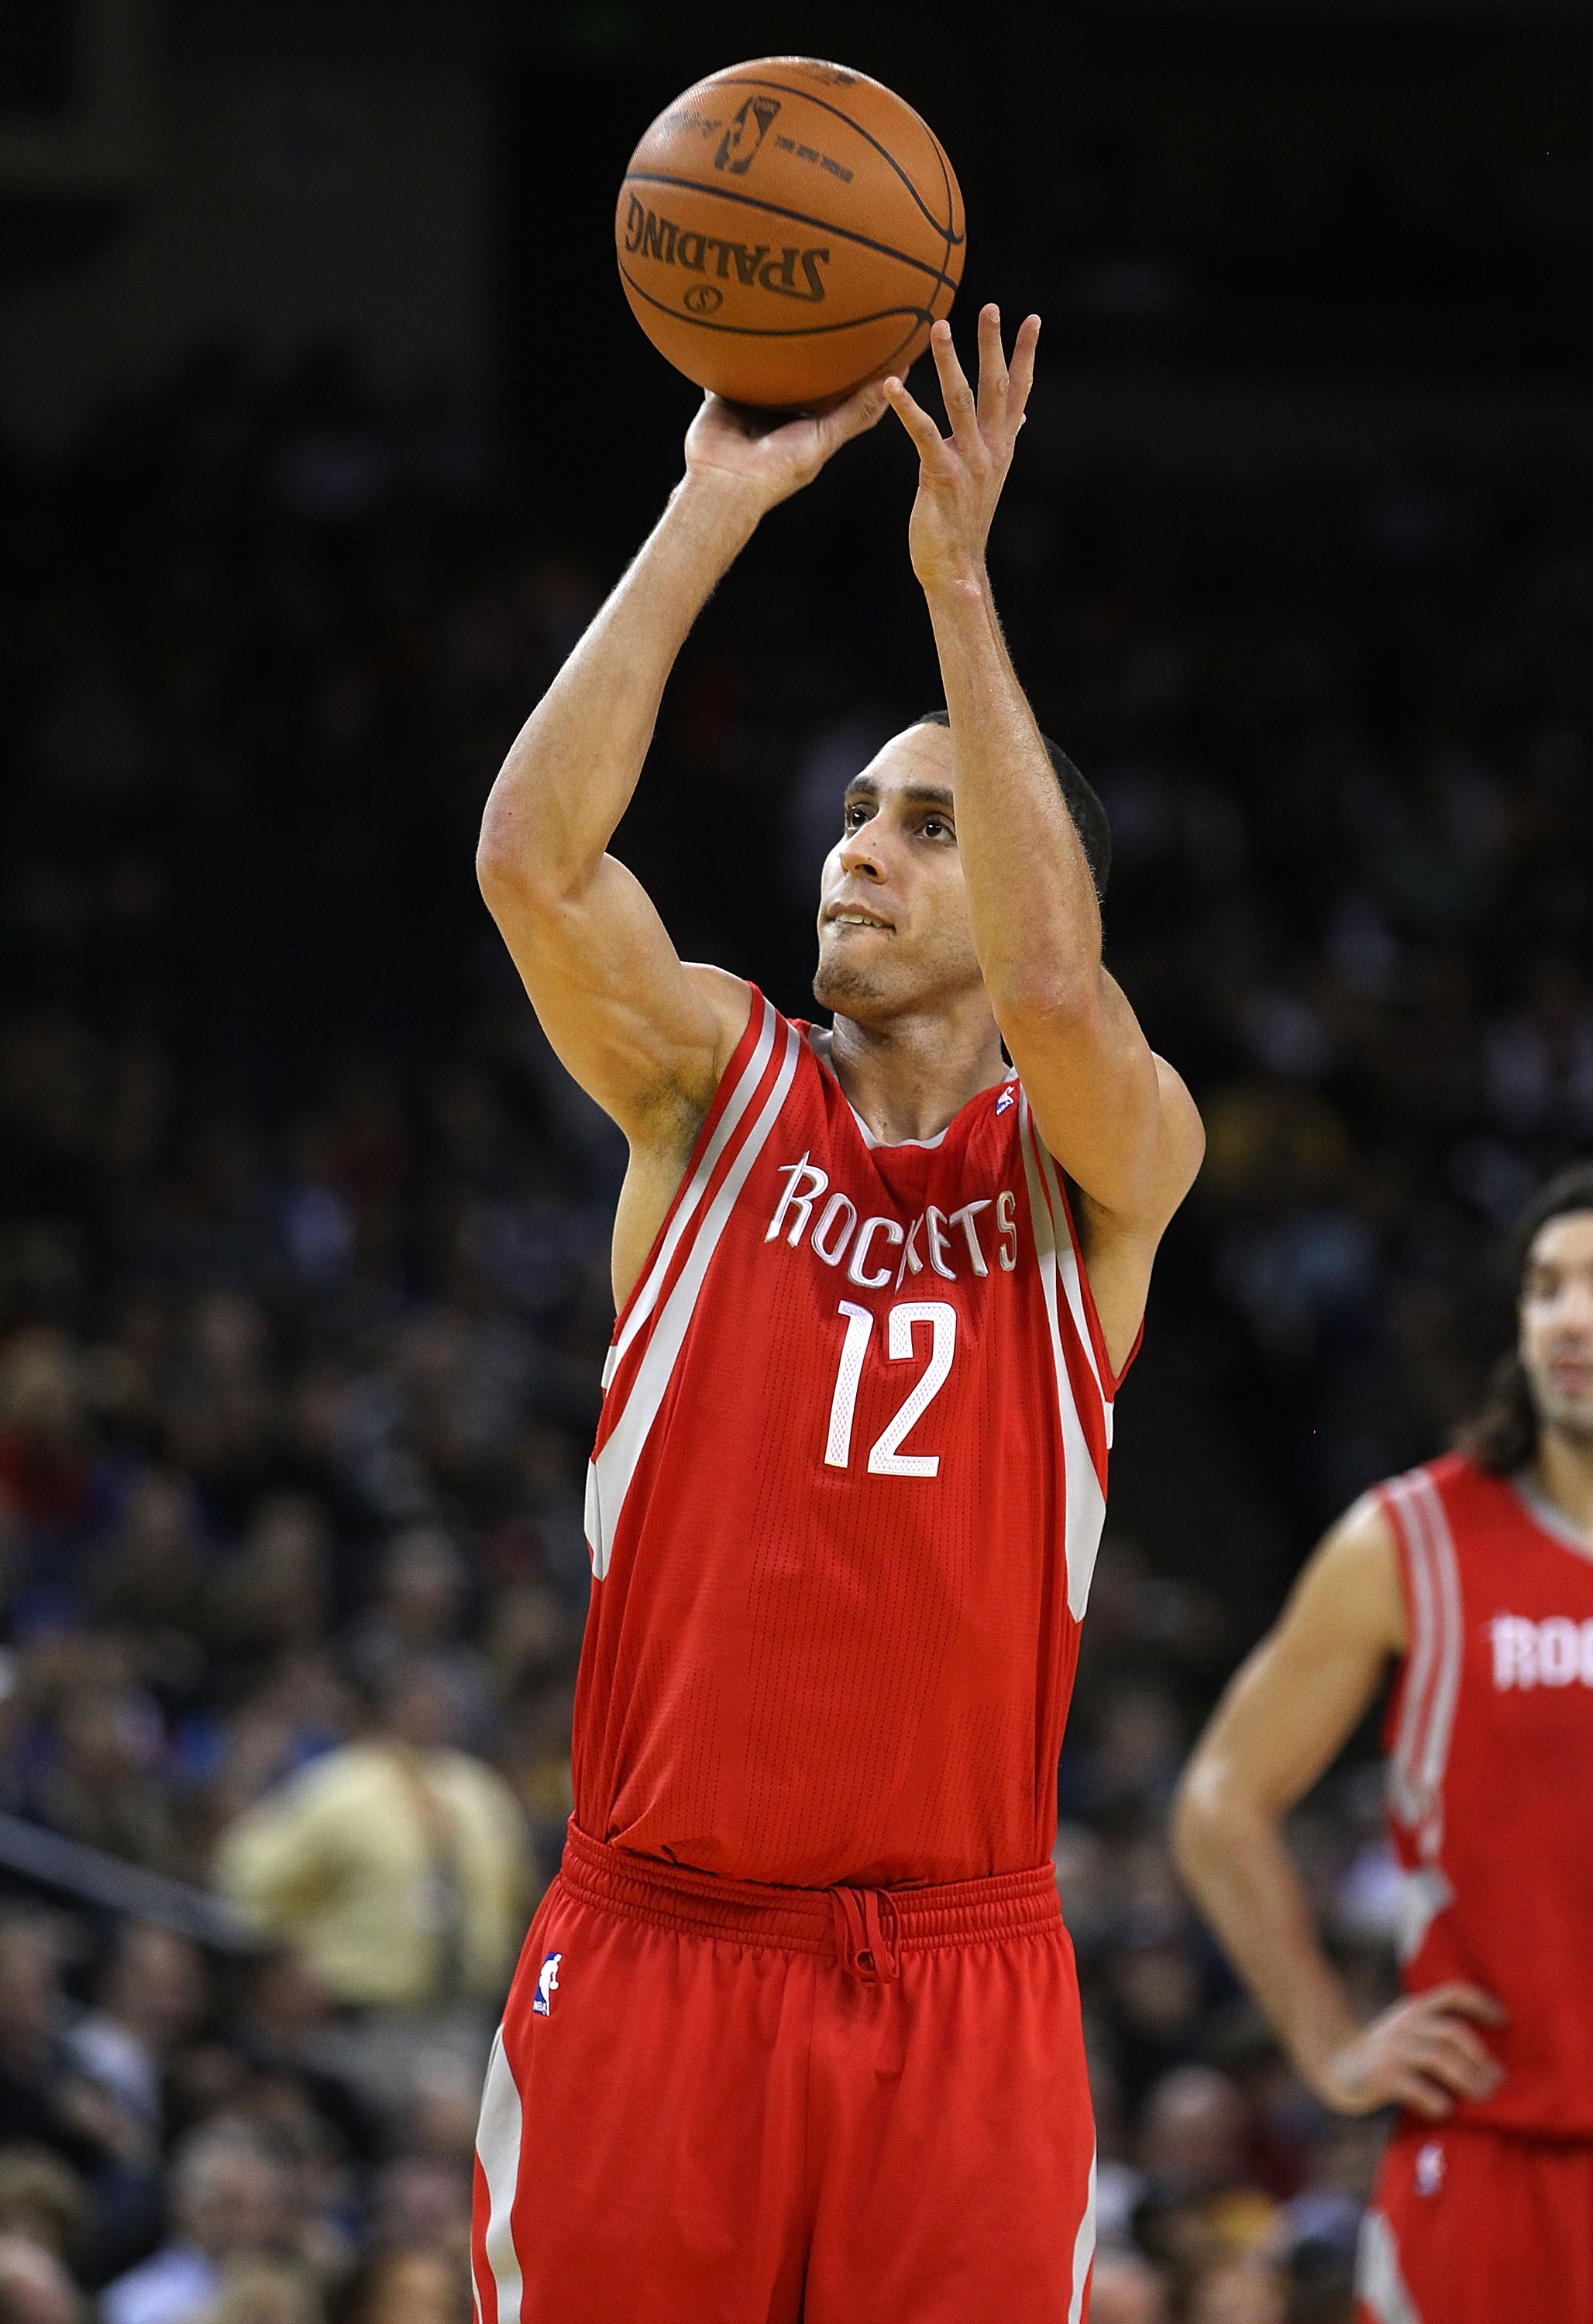 OAKLAND, CA - DECEMBER 20:  Kevin Martin #12 of the Houston Rockets in action against the Golden State Warriors at Oracle Arena on December 20, 2010 in Oakland, California. NOTE TO USER: User expressly acknowledges and agrees that, by downloading and or u